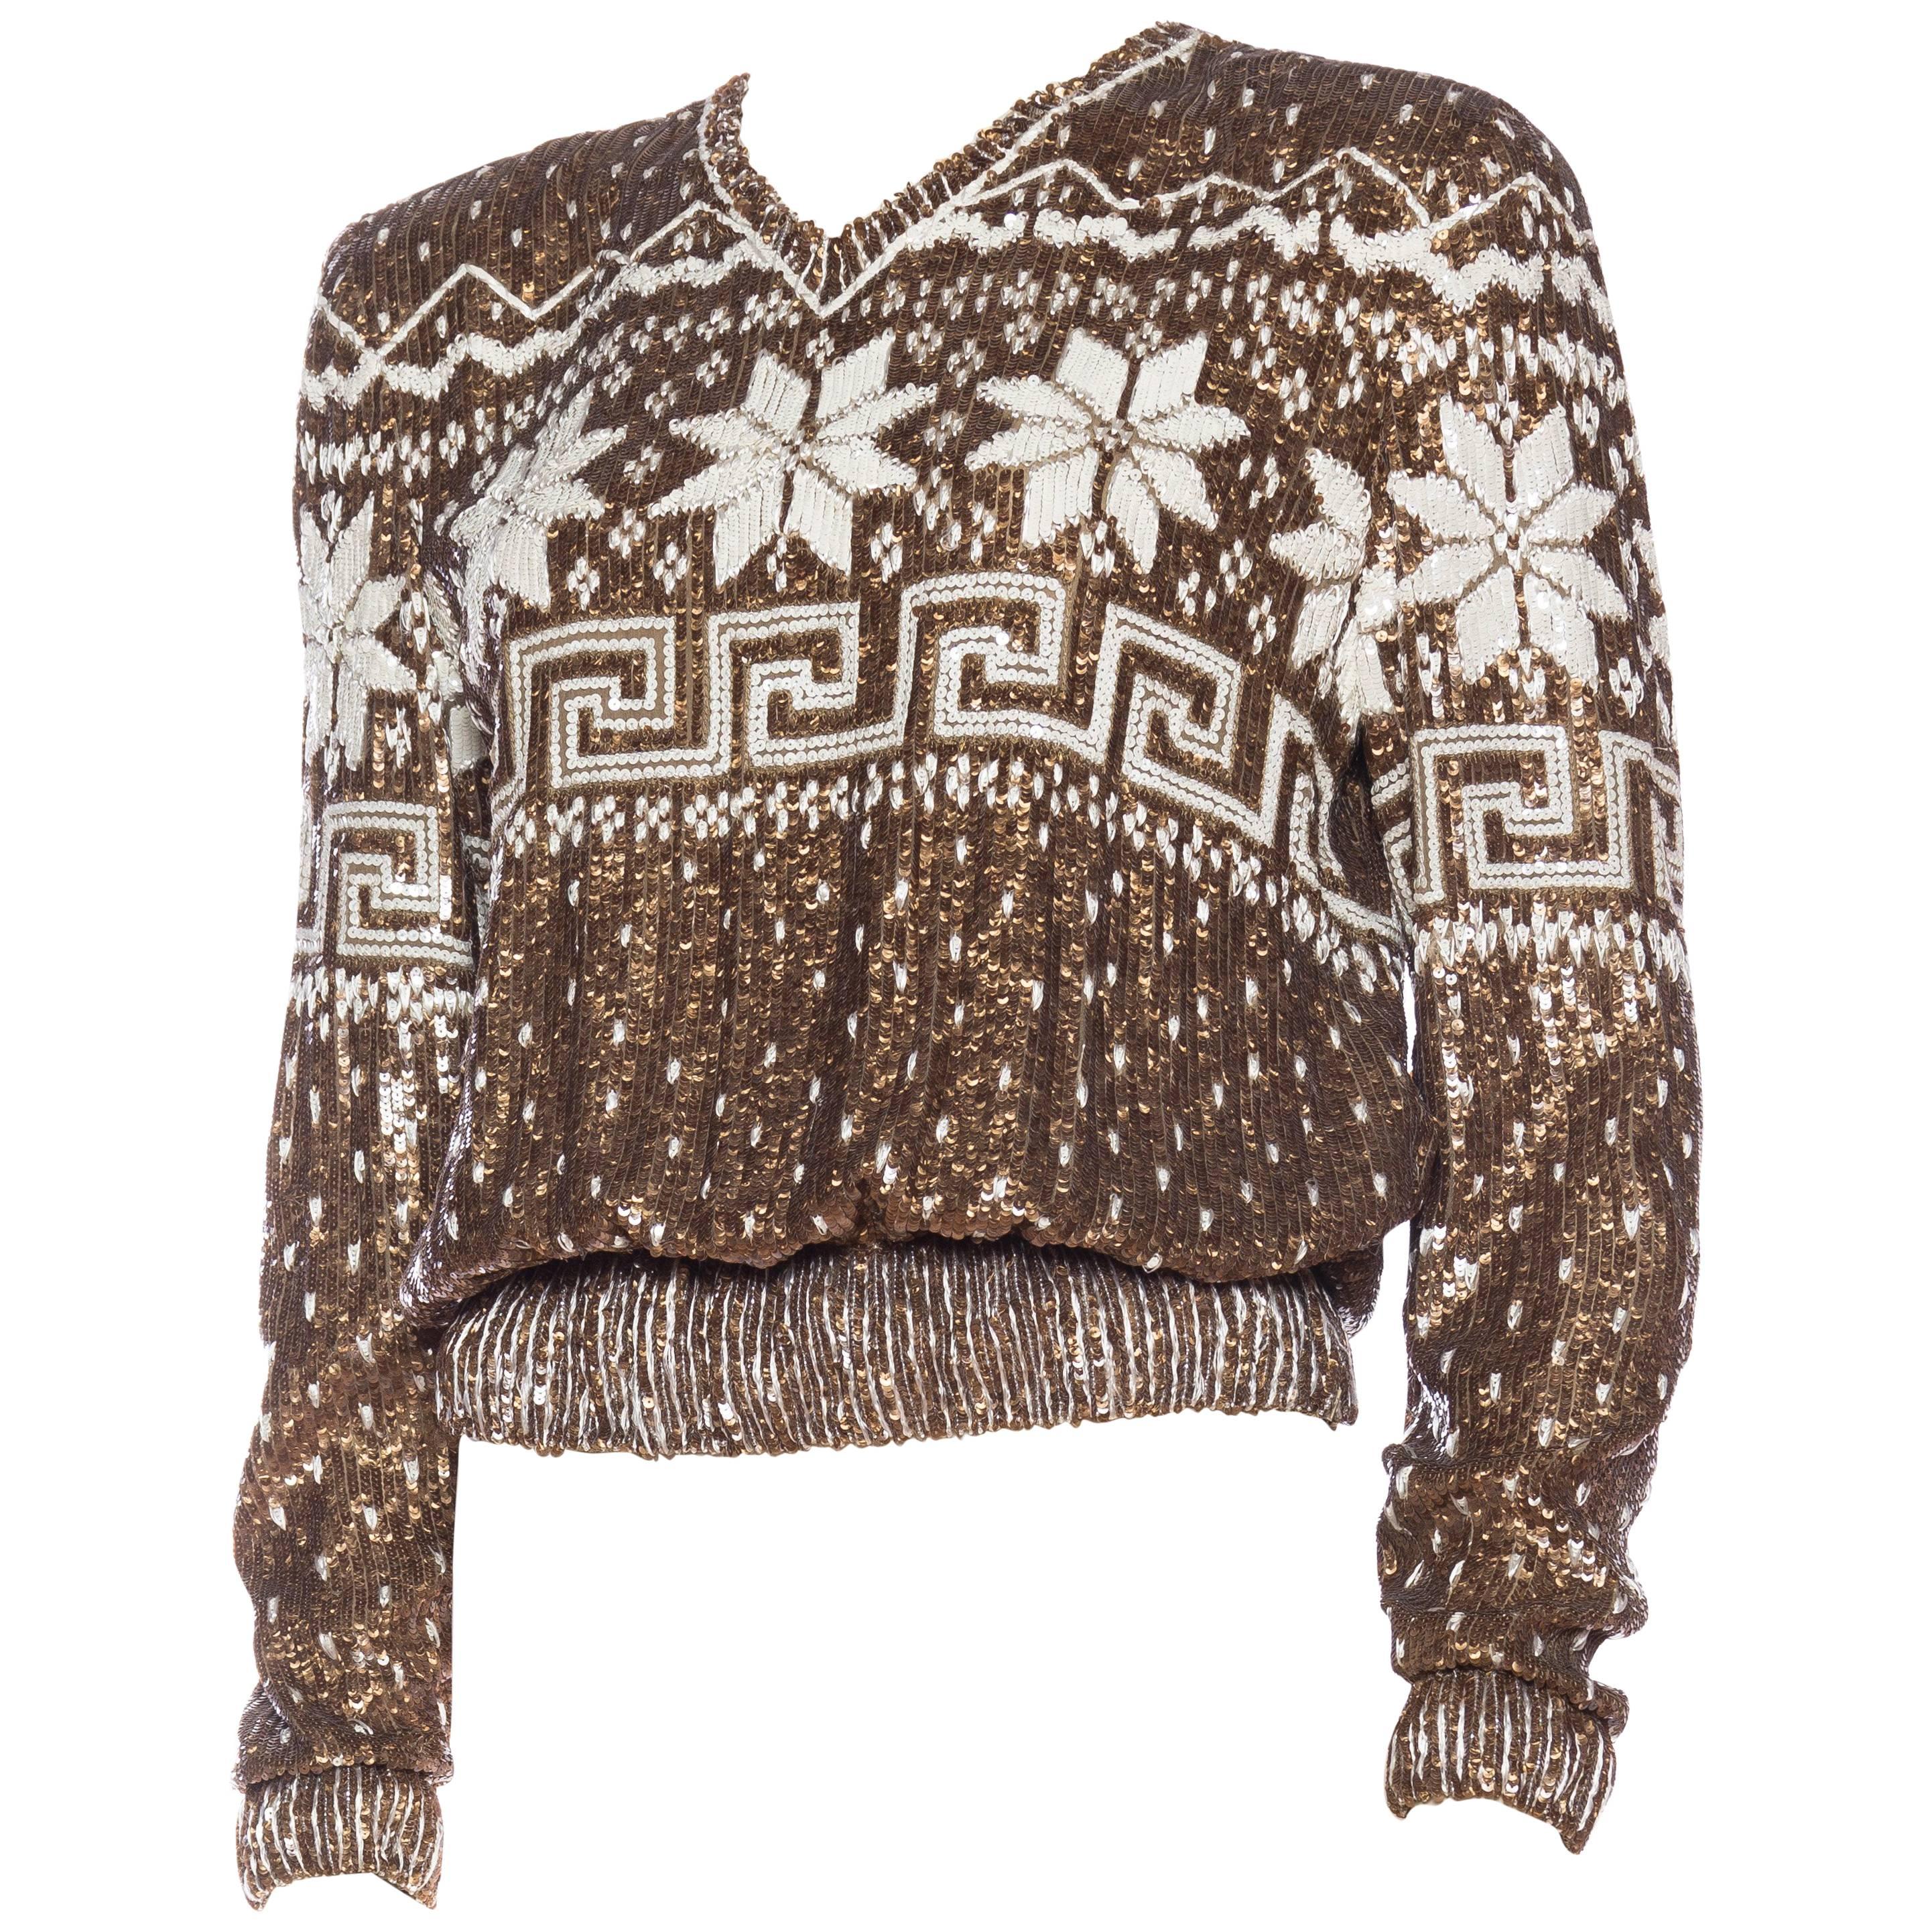 Valentino "Faux" Fairisle Sweater in Sequins and Embroidery